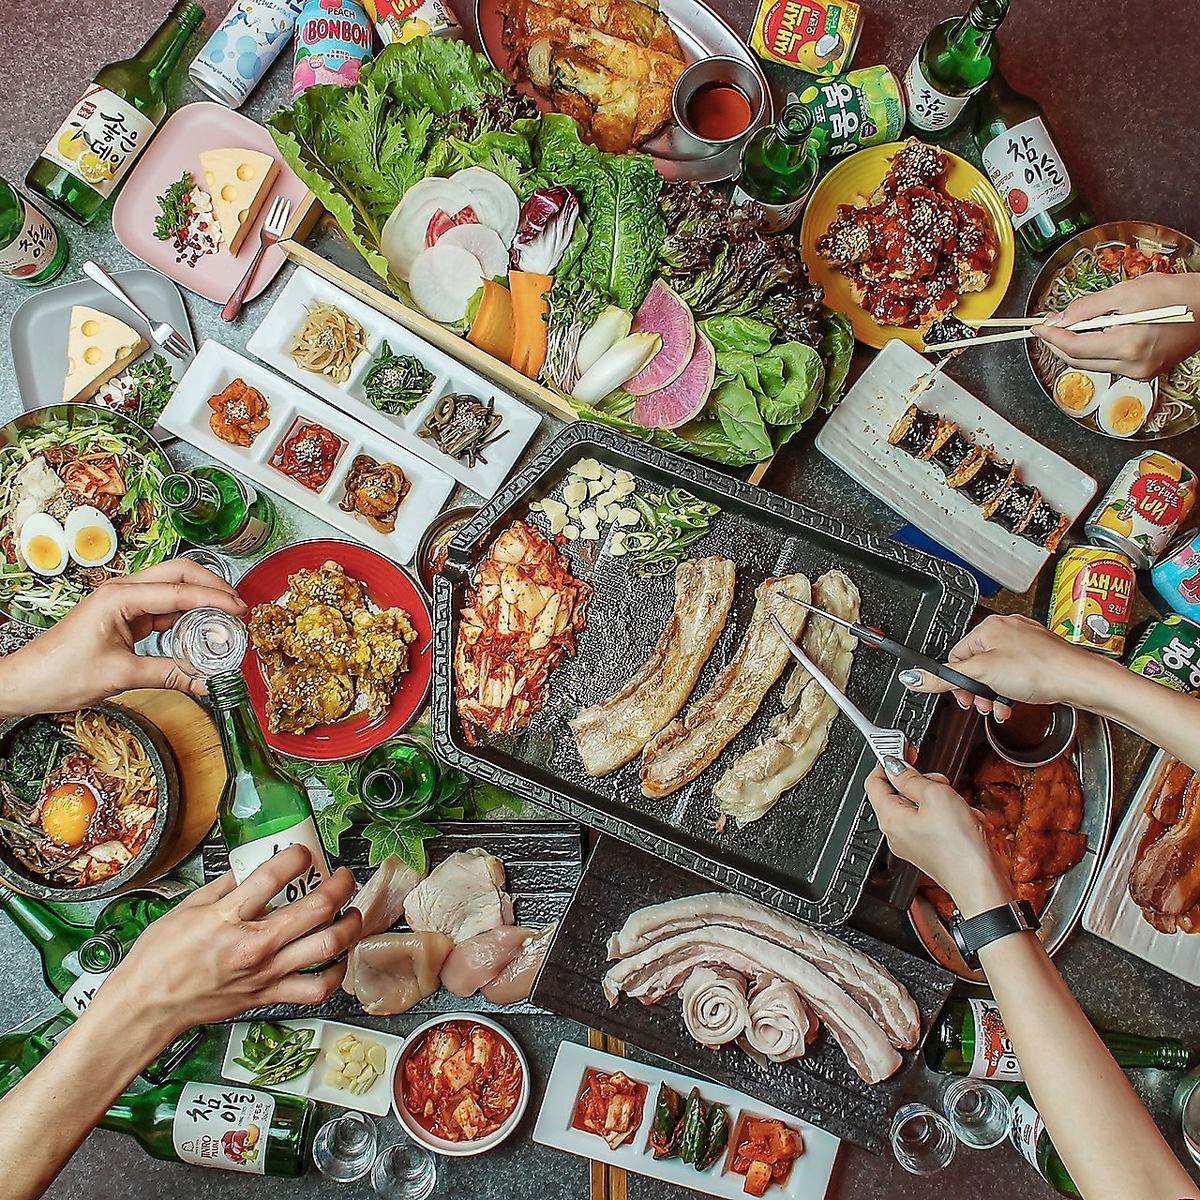 Up to 4 hours! Endless all-you-can-eat and drink over 80 types of samgyeopsal and more!